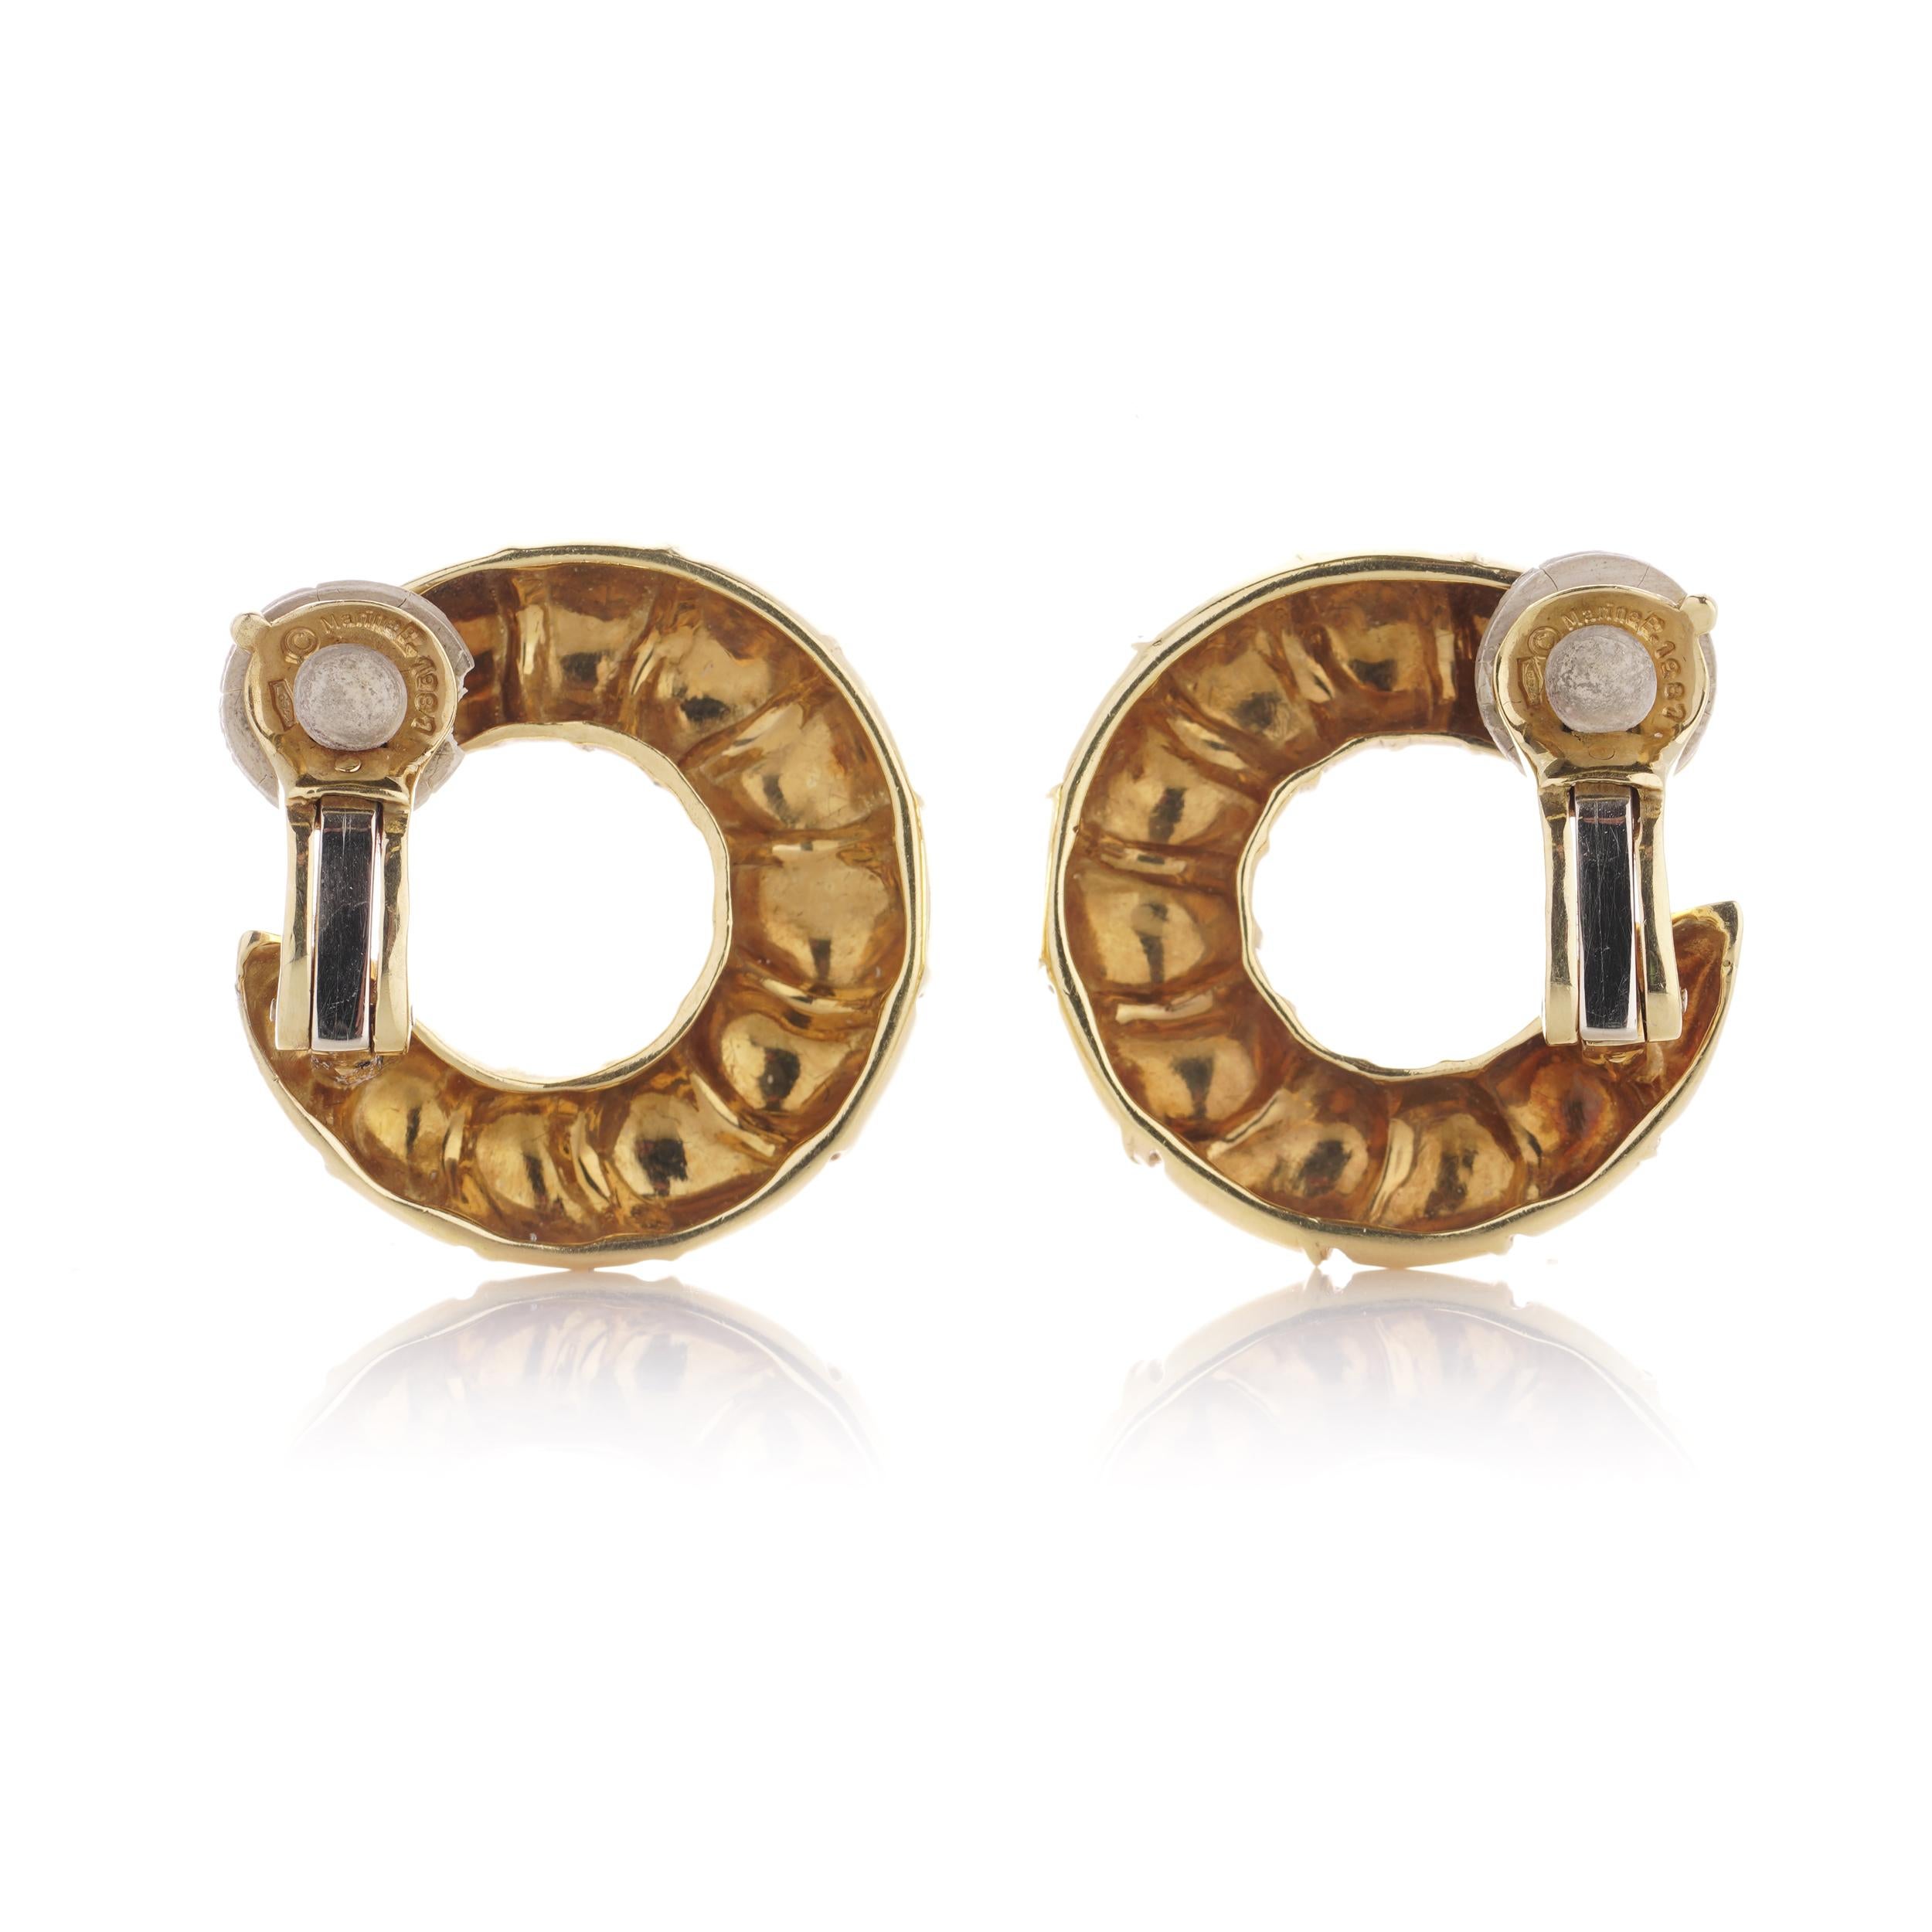 Marina B. Milan 18kt yellow gold vintage pair of hoop ear clips in a scallop design.
Signed Marina B. Italian hallmarks, Italy.
Made in Italy, Circa 1990s

The swirl earrings are crafted in Milan, Italy by the renowned Marina Bvlgari jewellery